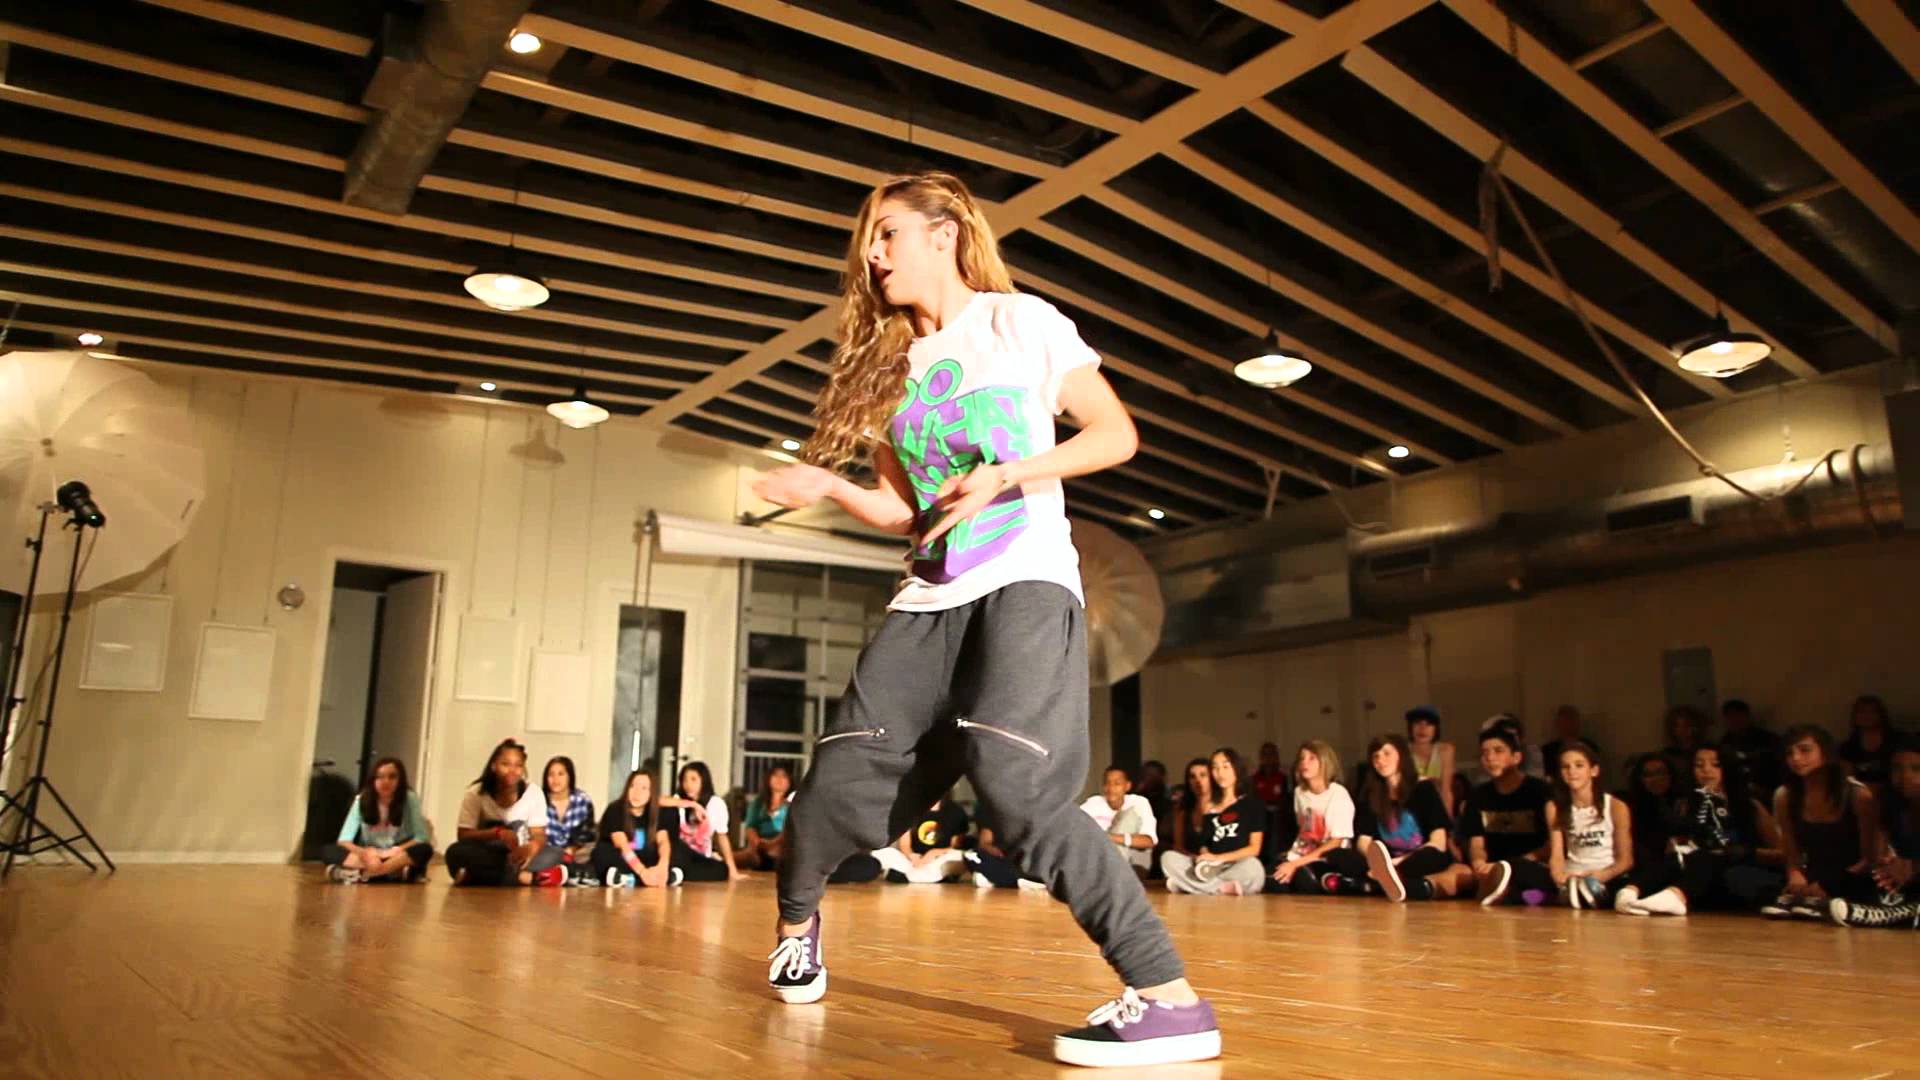 CHACHI GONZALES LIPS ARE MOVIN DANCE TUTORIAL on Vimeo